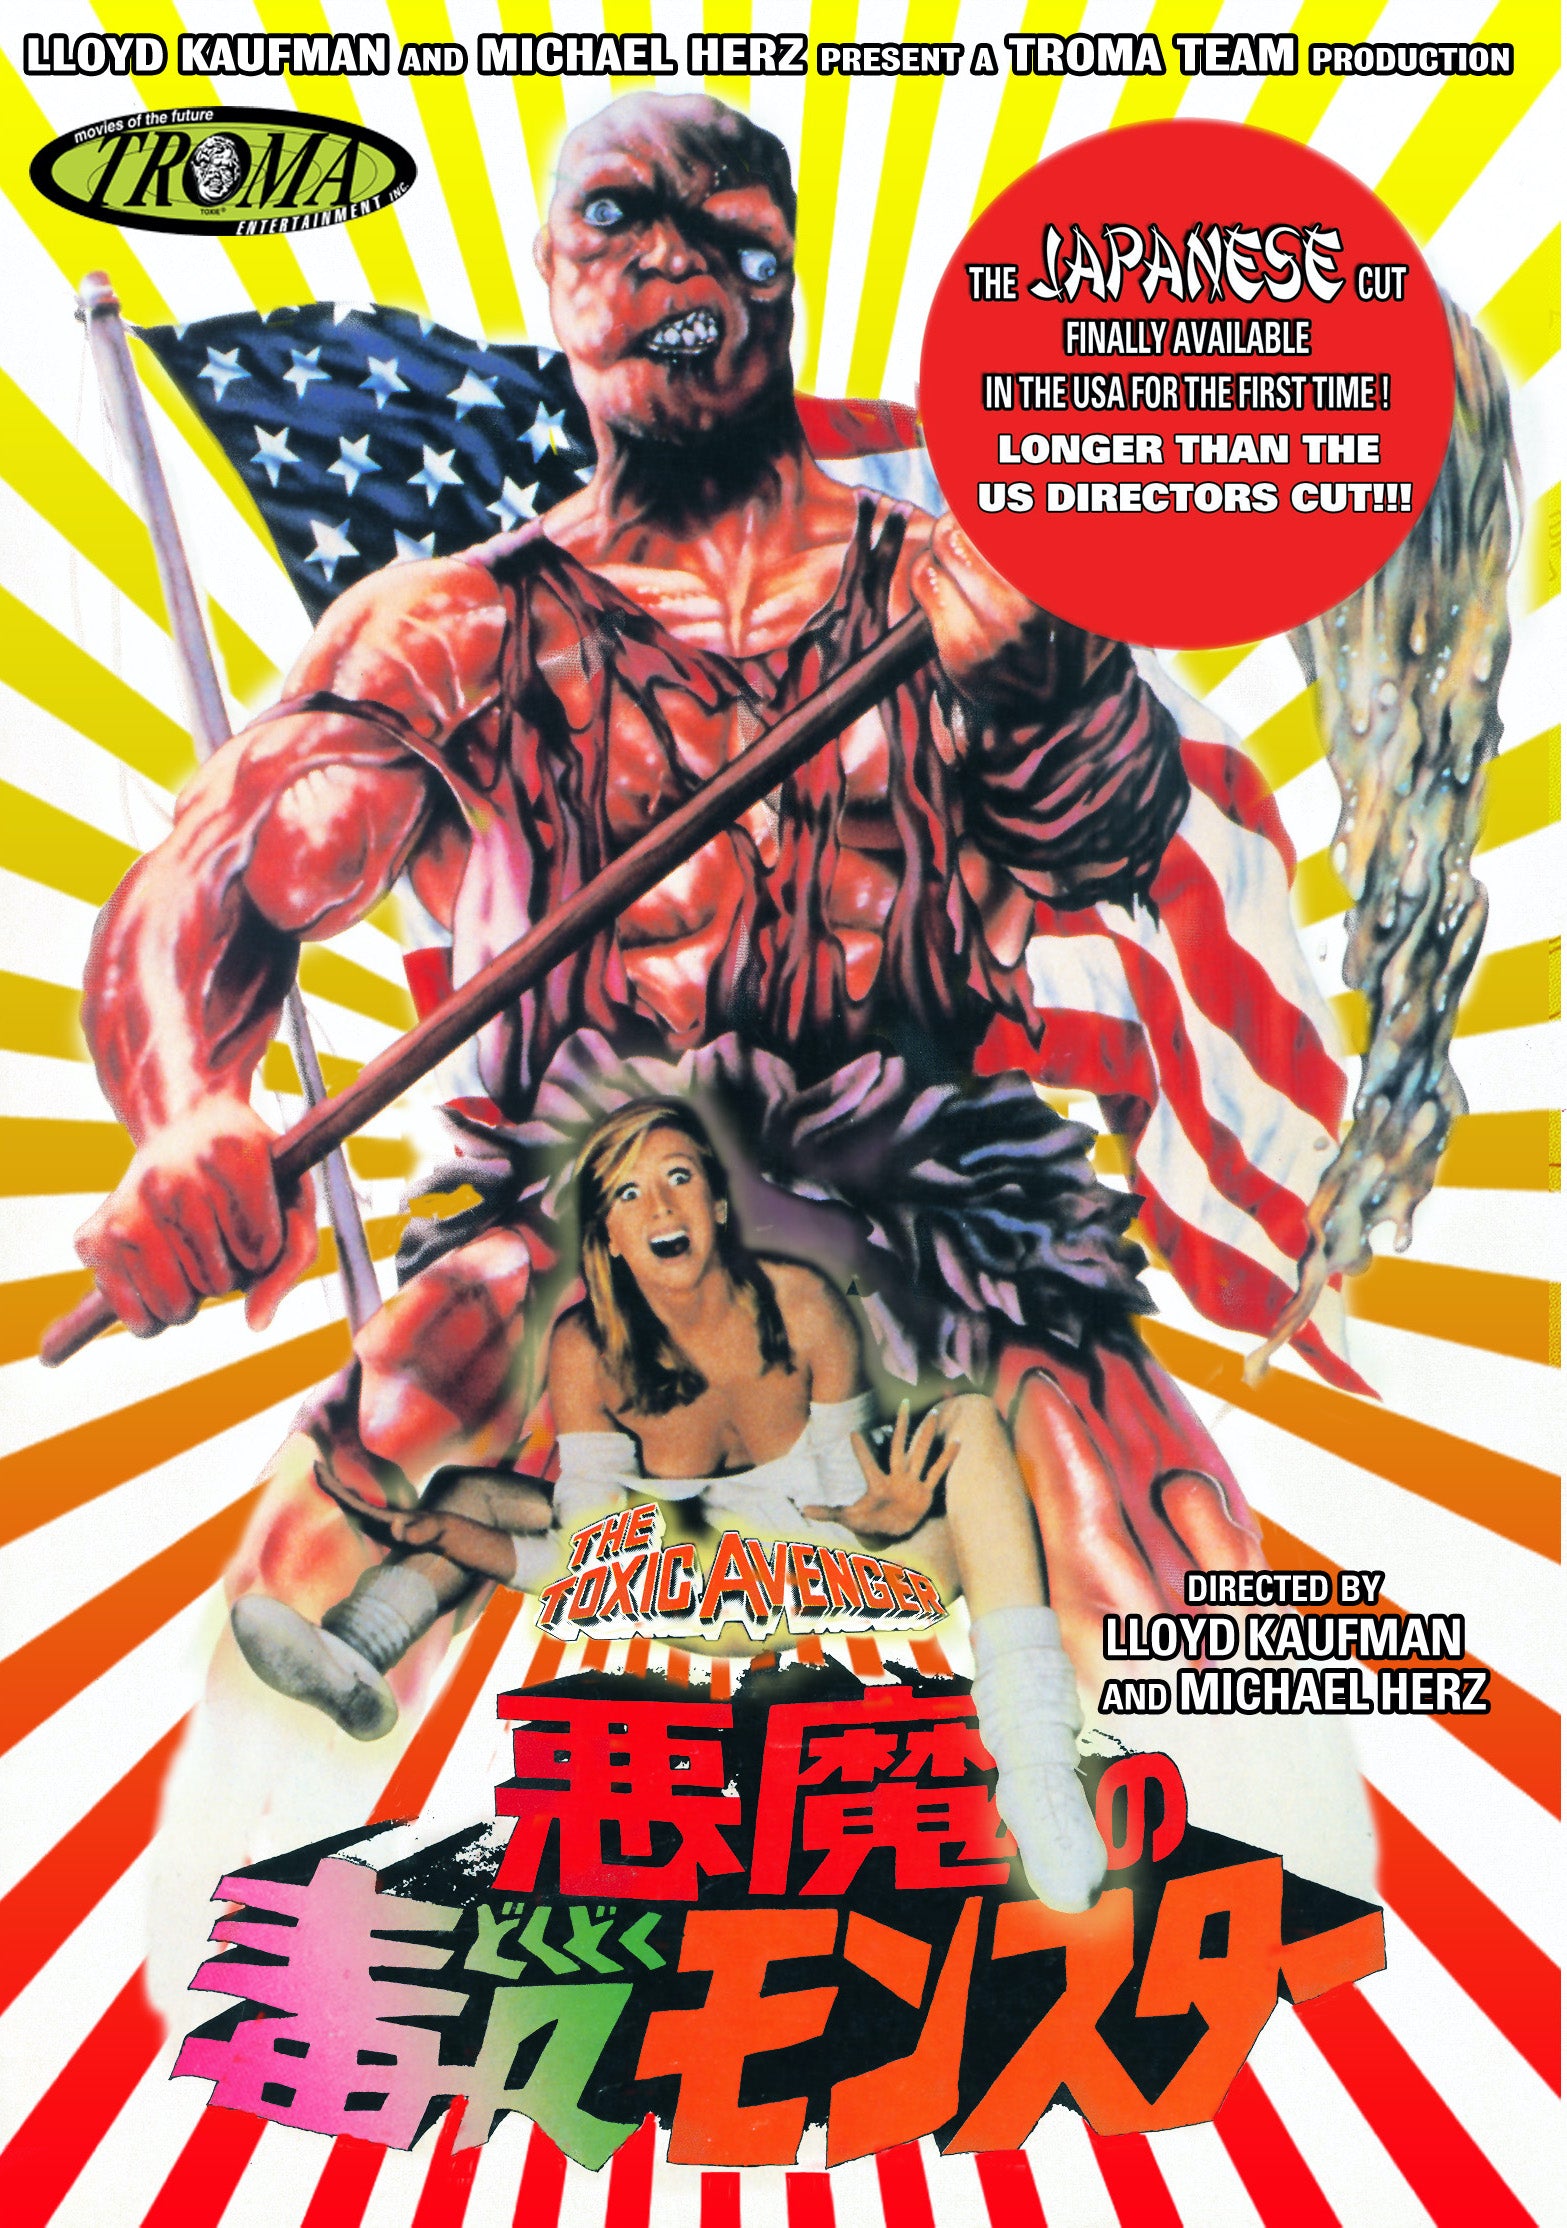 THE TOXIC AVENGER (THE JAPANESE CUT) DVD